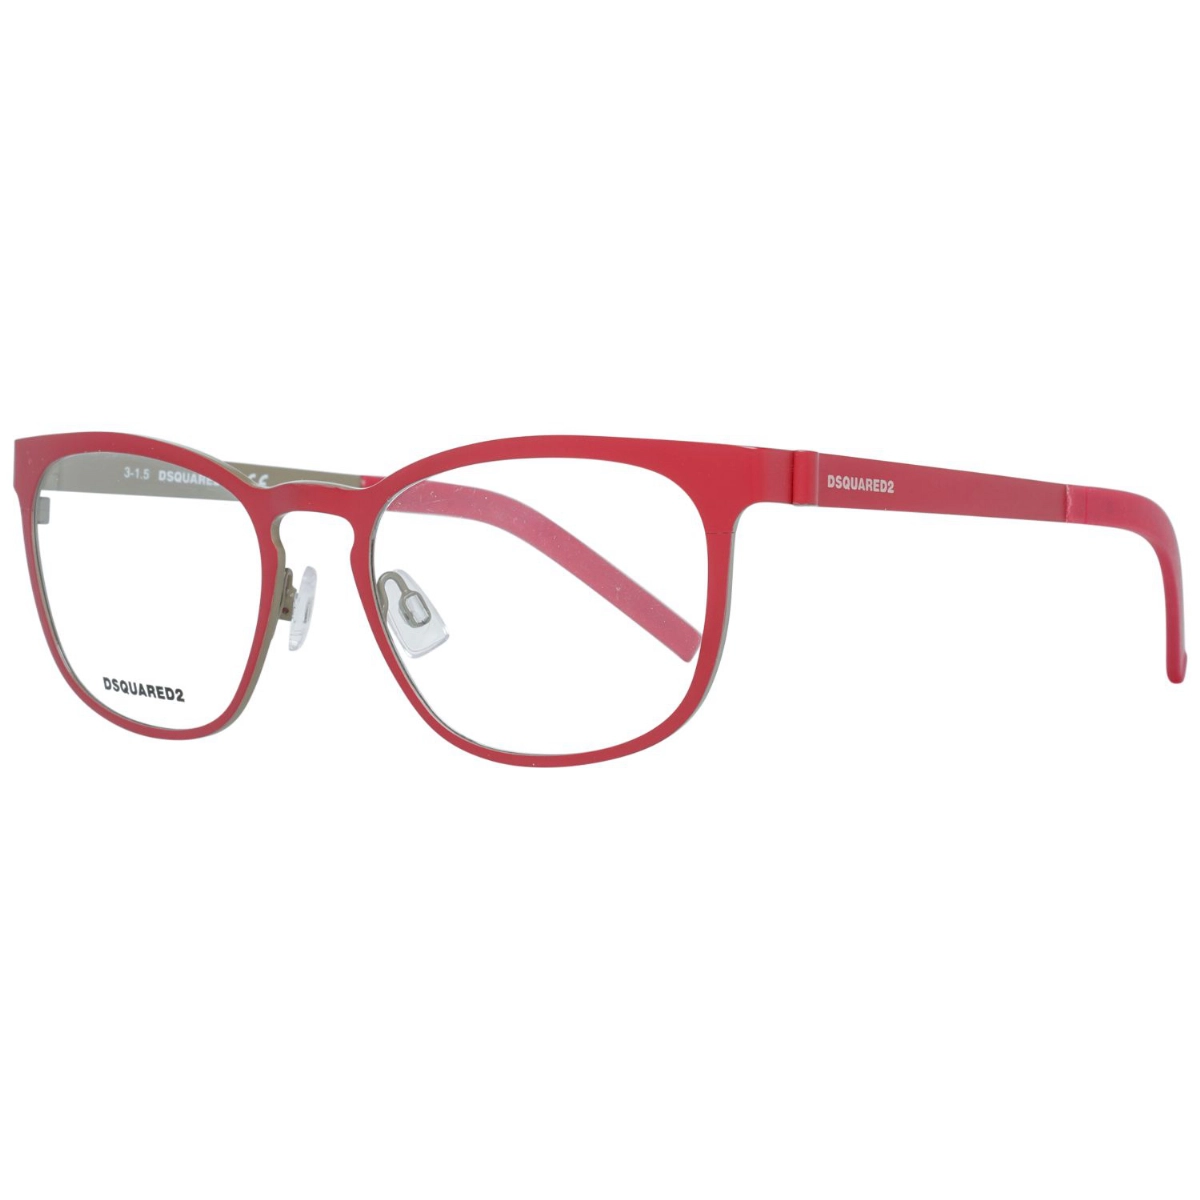 GLASSES FOR WOMAN DSQUARED2 DQ5184-068-51